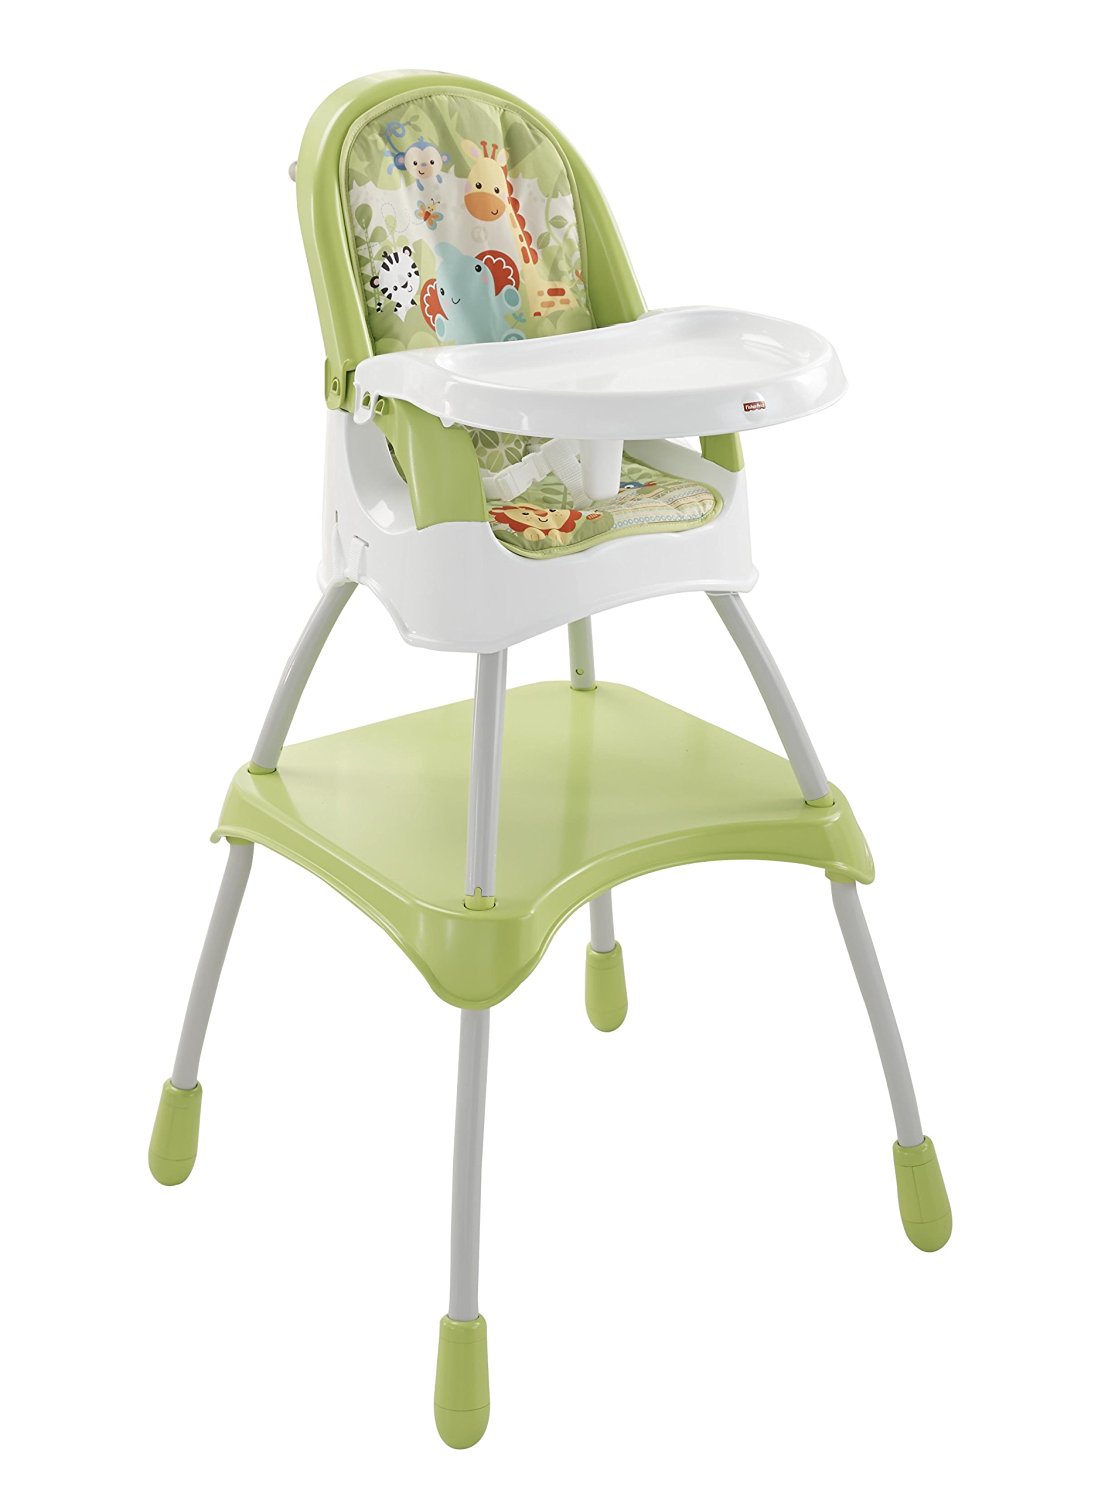 4 in 1 High Chair